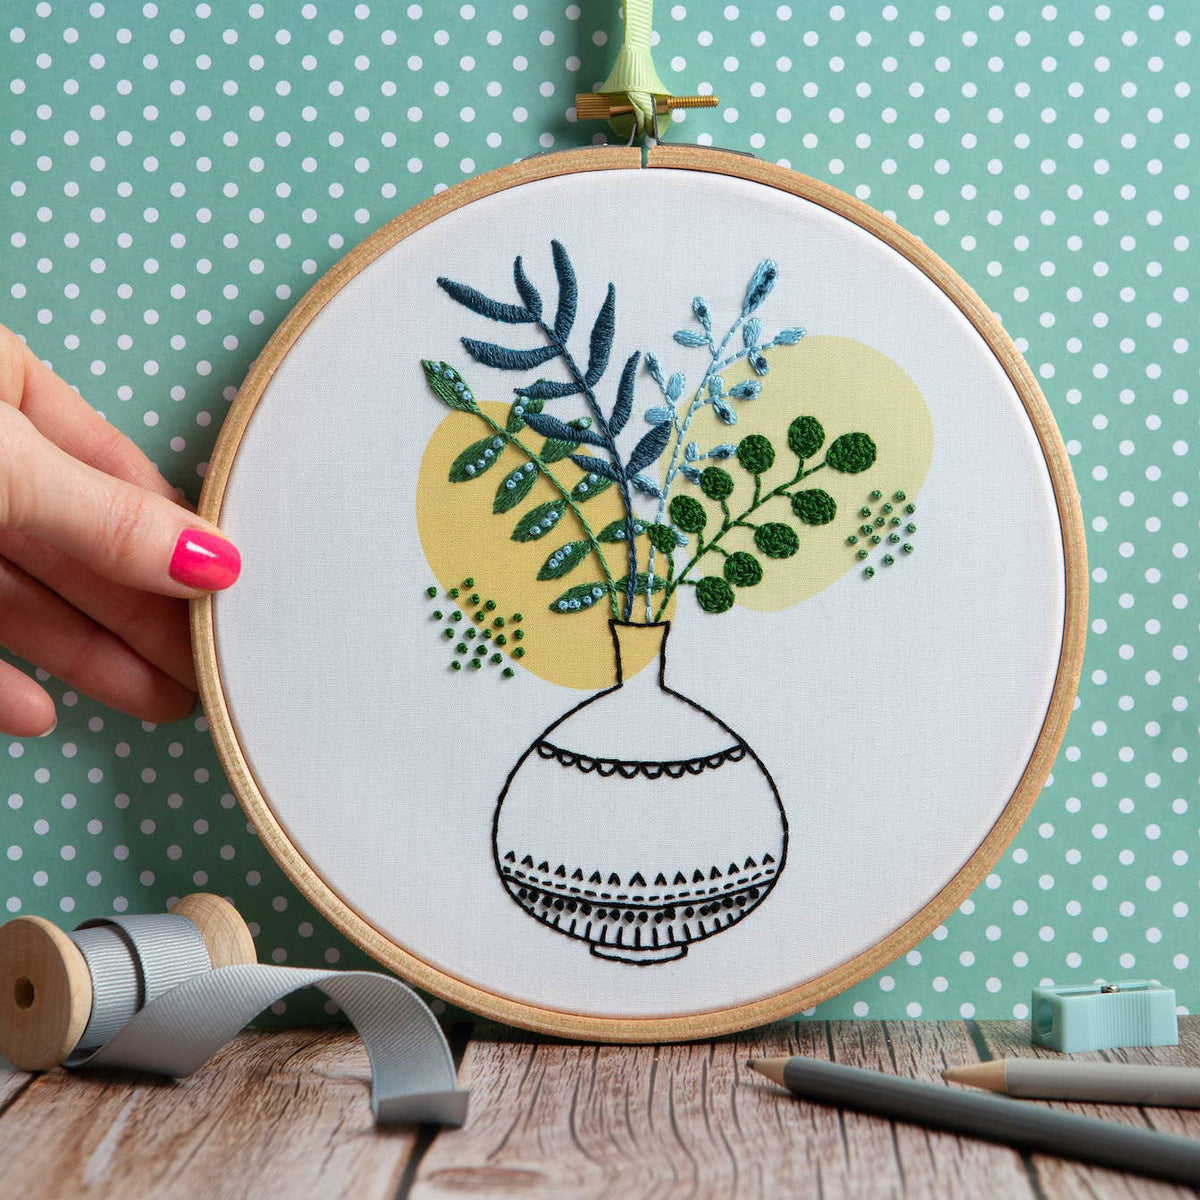 Green Fingers Hand Embroidery Kit